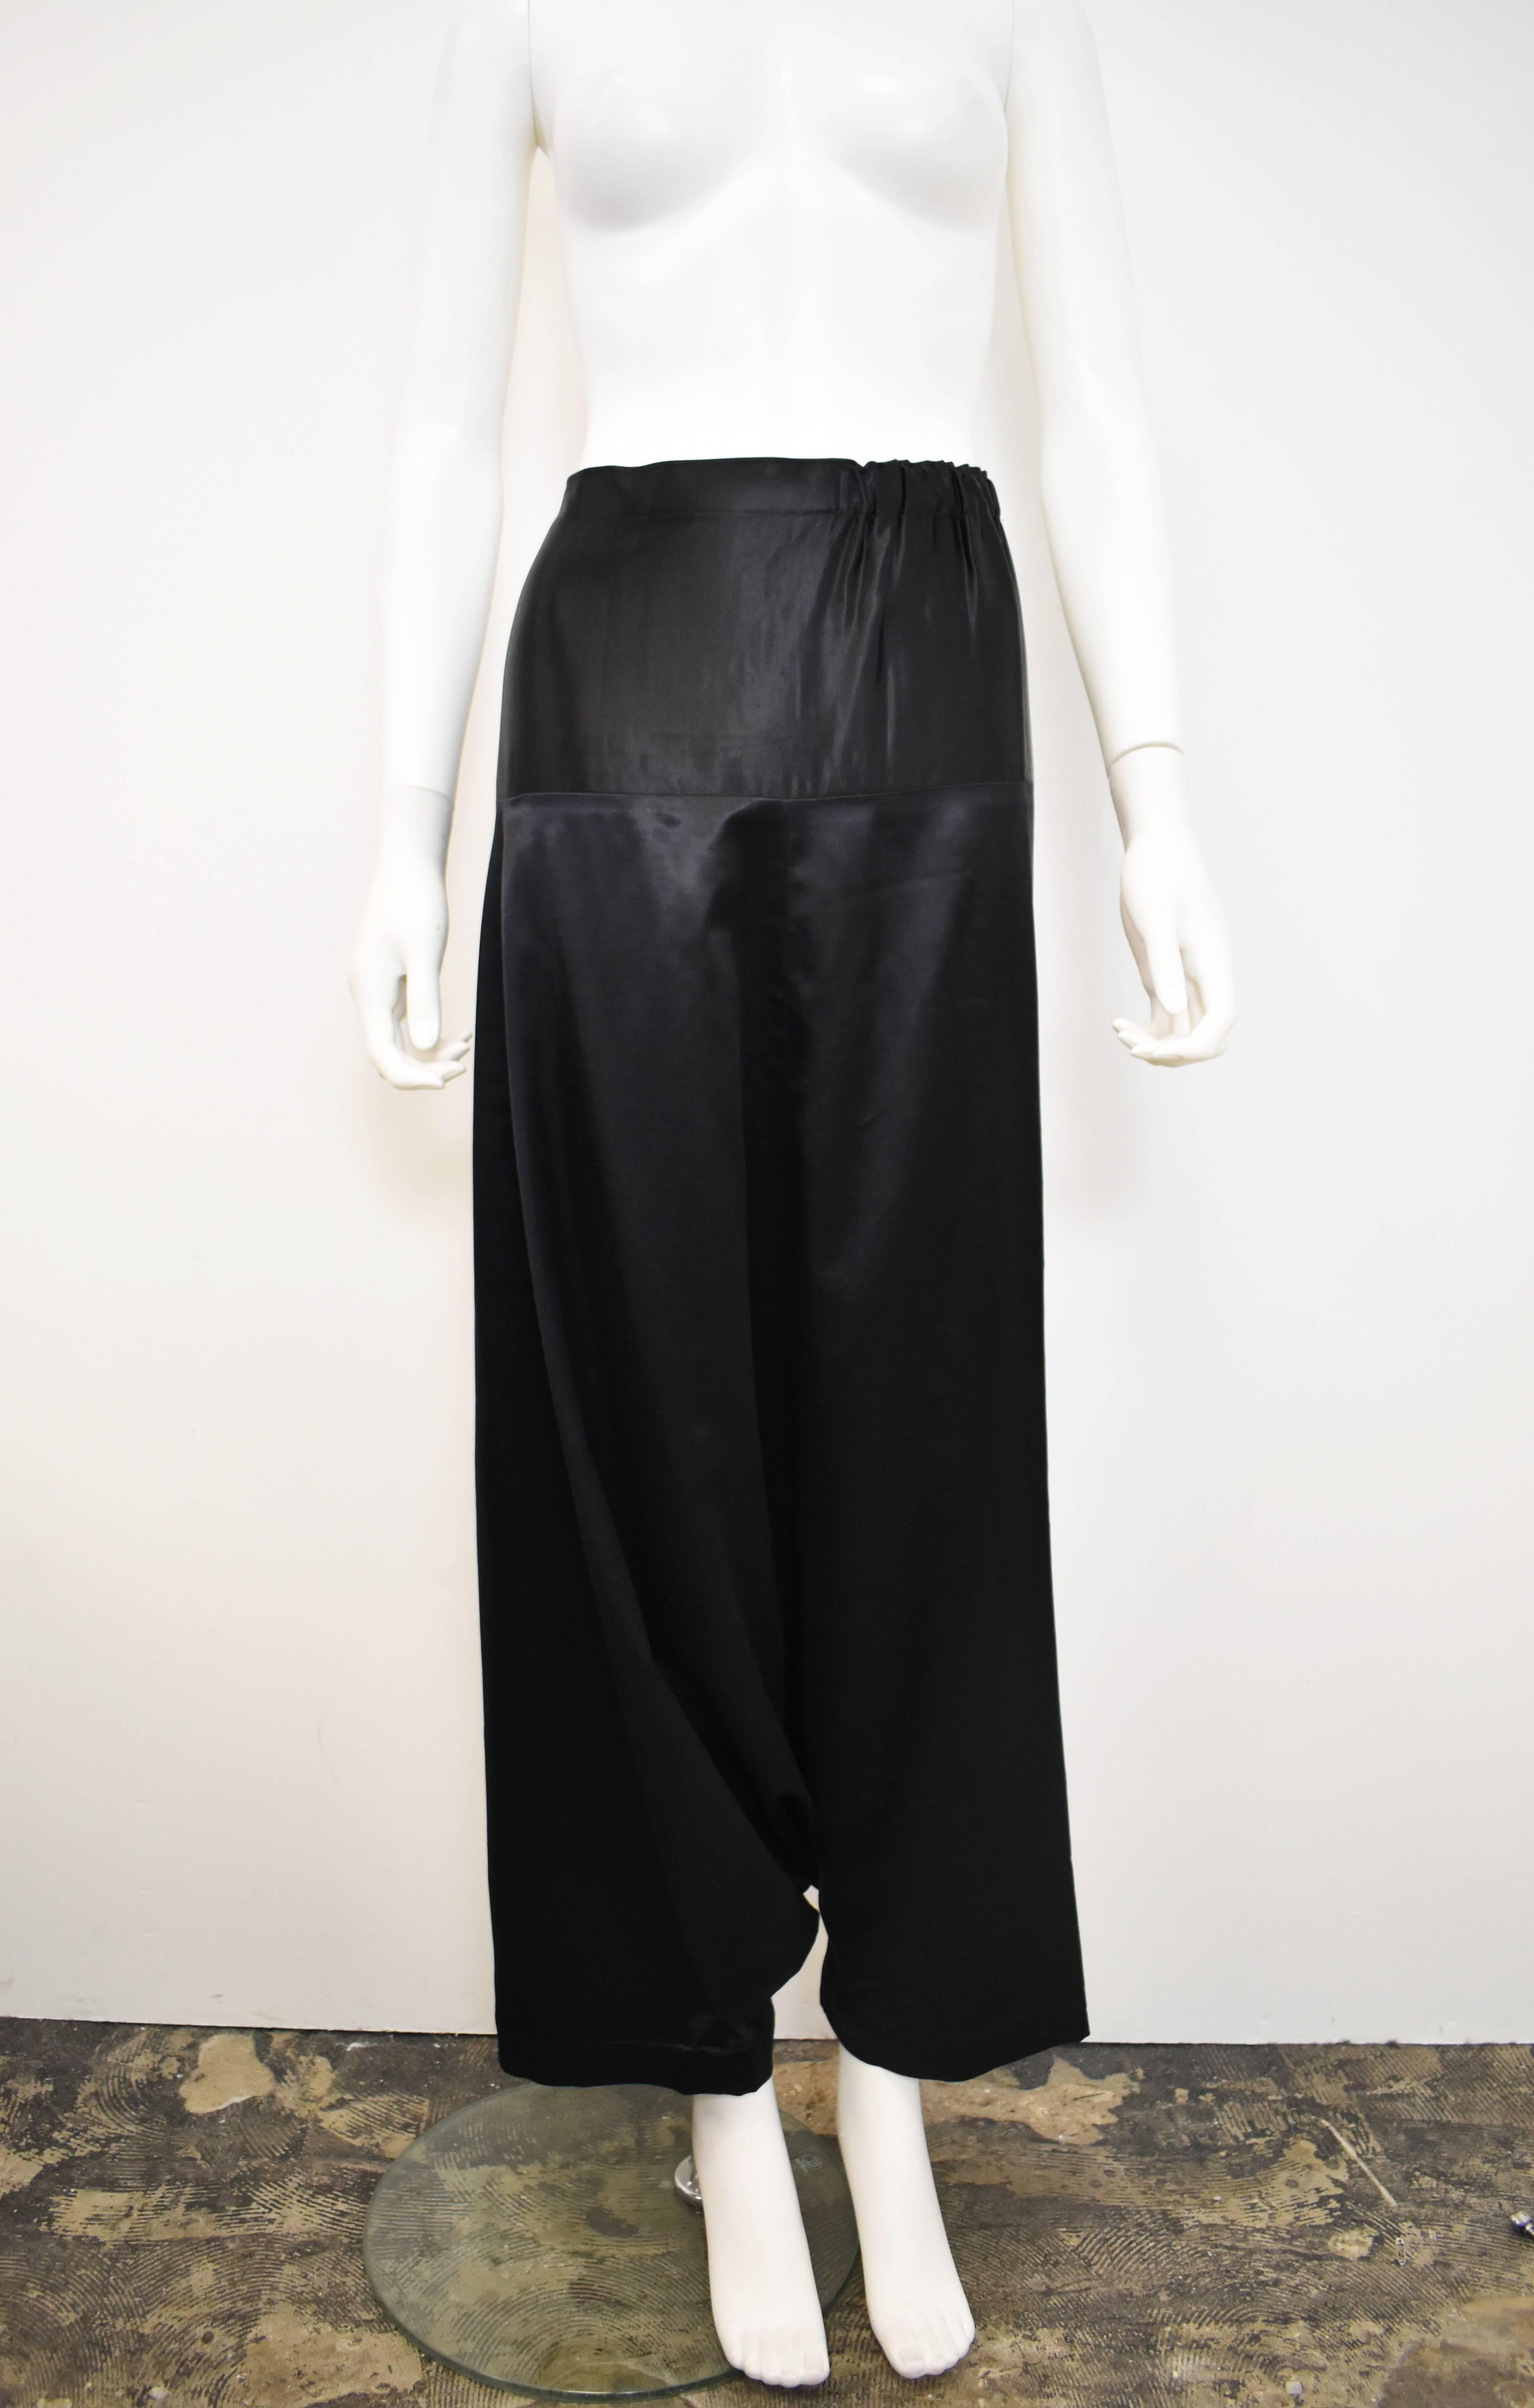 A modern yet highly wearable pair of wide leg trousers from Iranian/British clothing designer Shirin Guild. The lagenlook trousers have a wonderful loose shape that falls flatteringly along the line of the body giving the appearance of a long skirt.